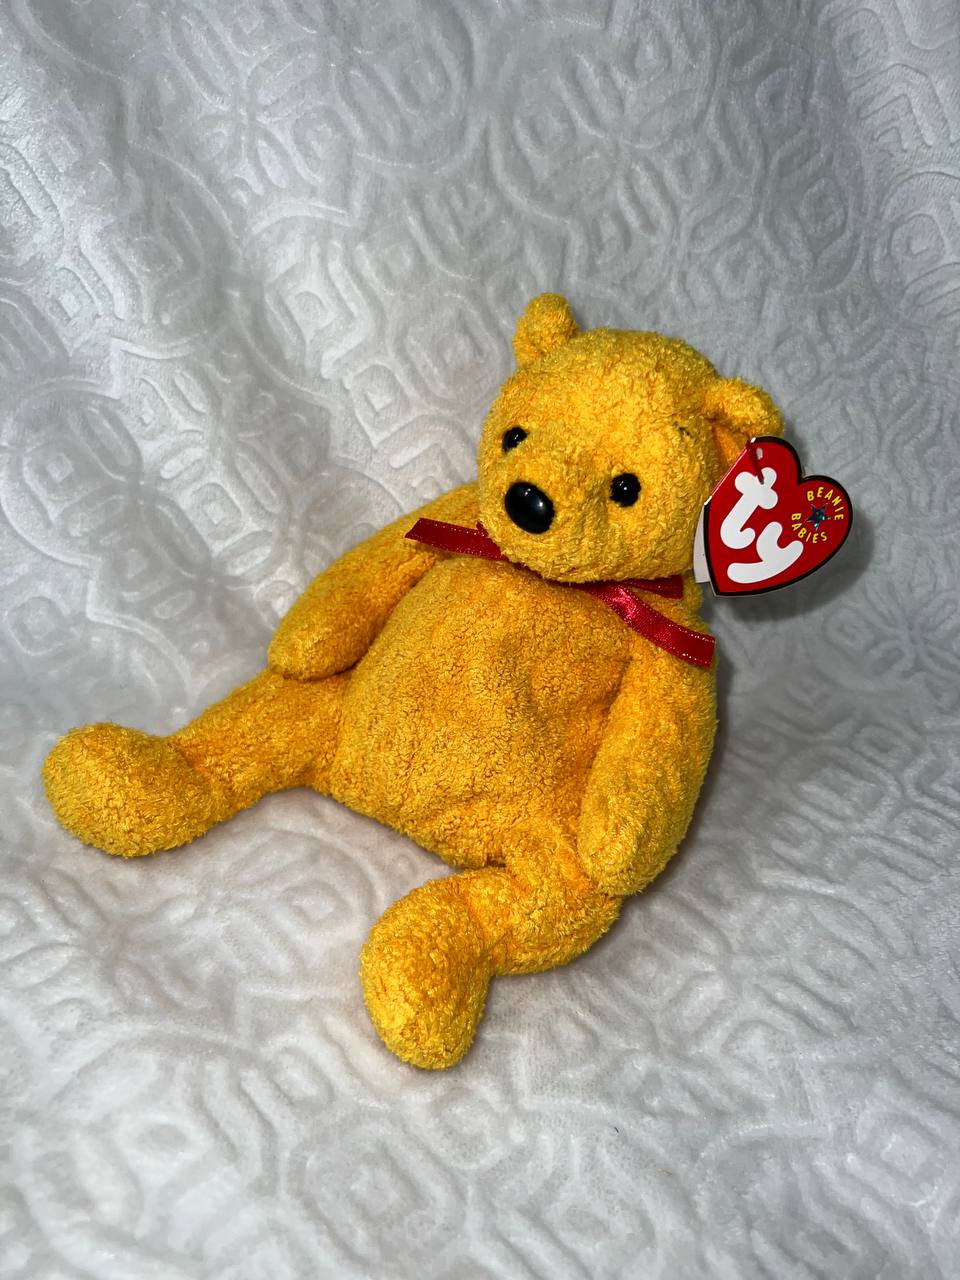 *RARE* MINT Poopsie Beanie Baby 2001 With Tag